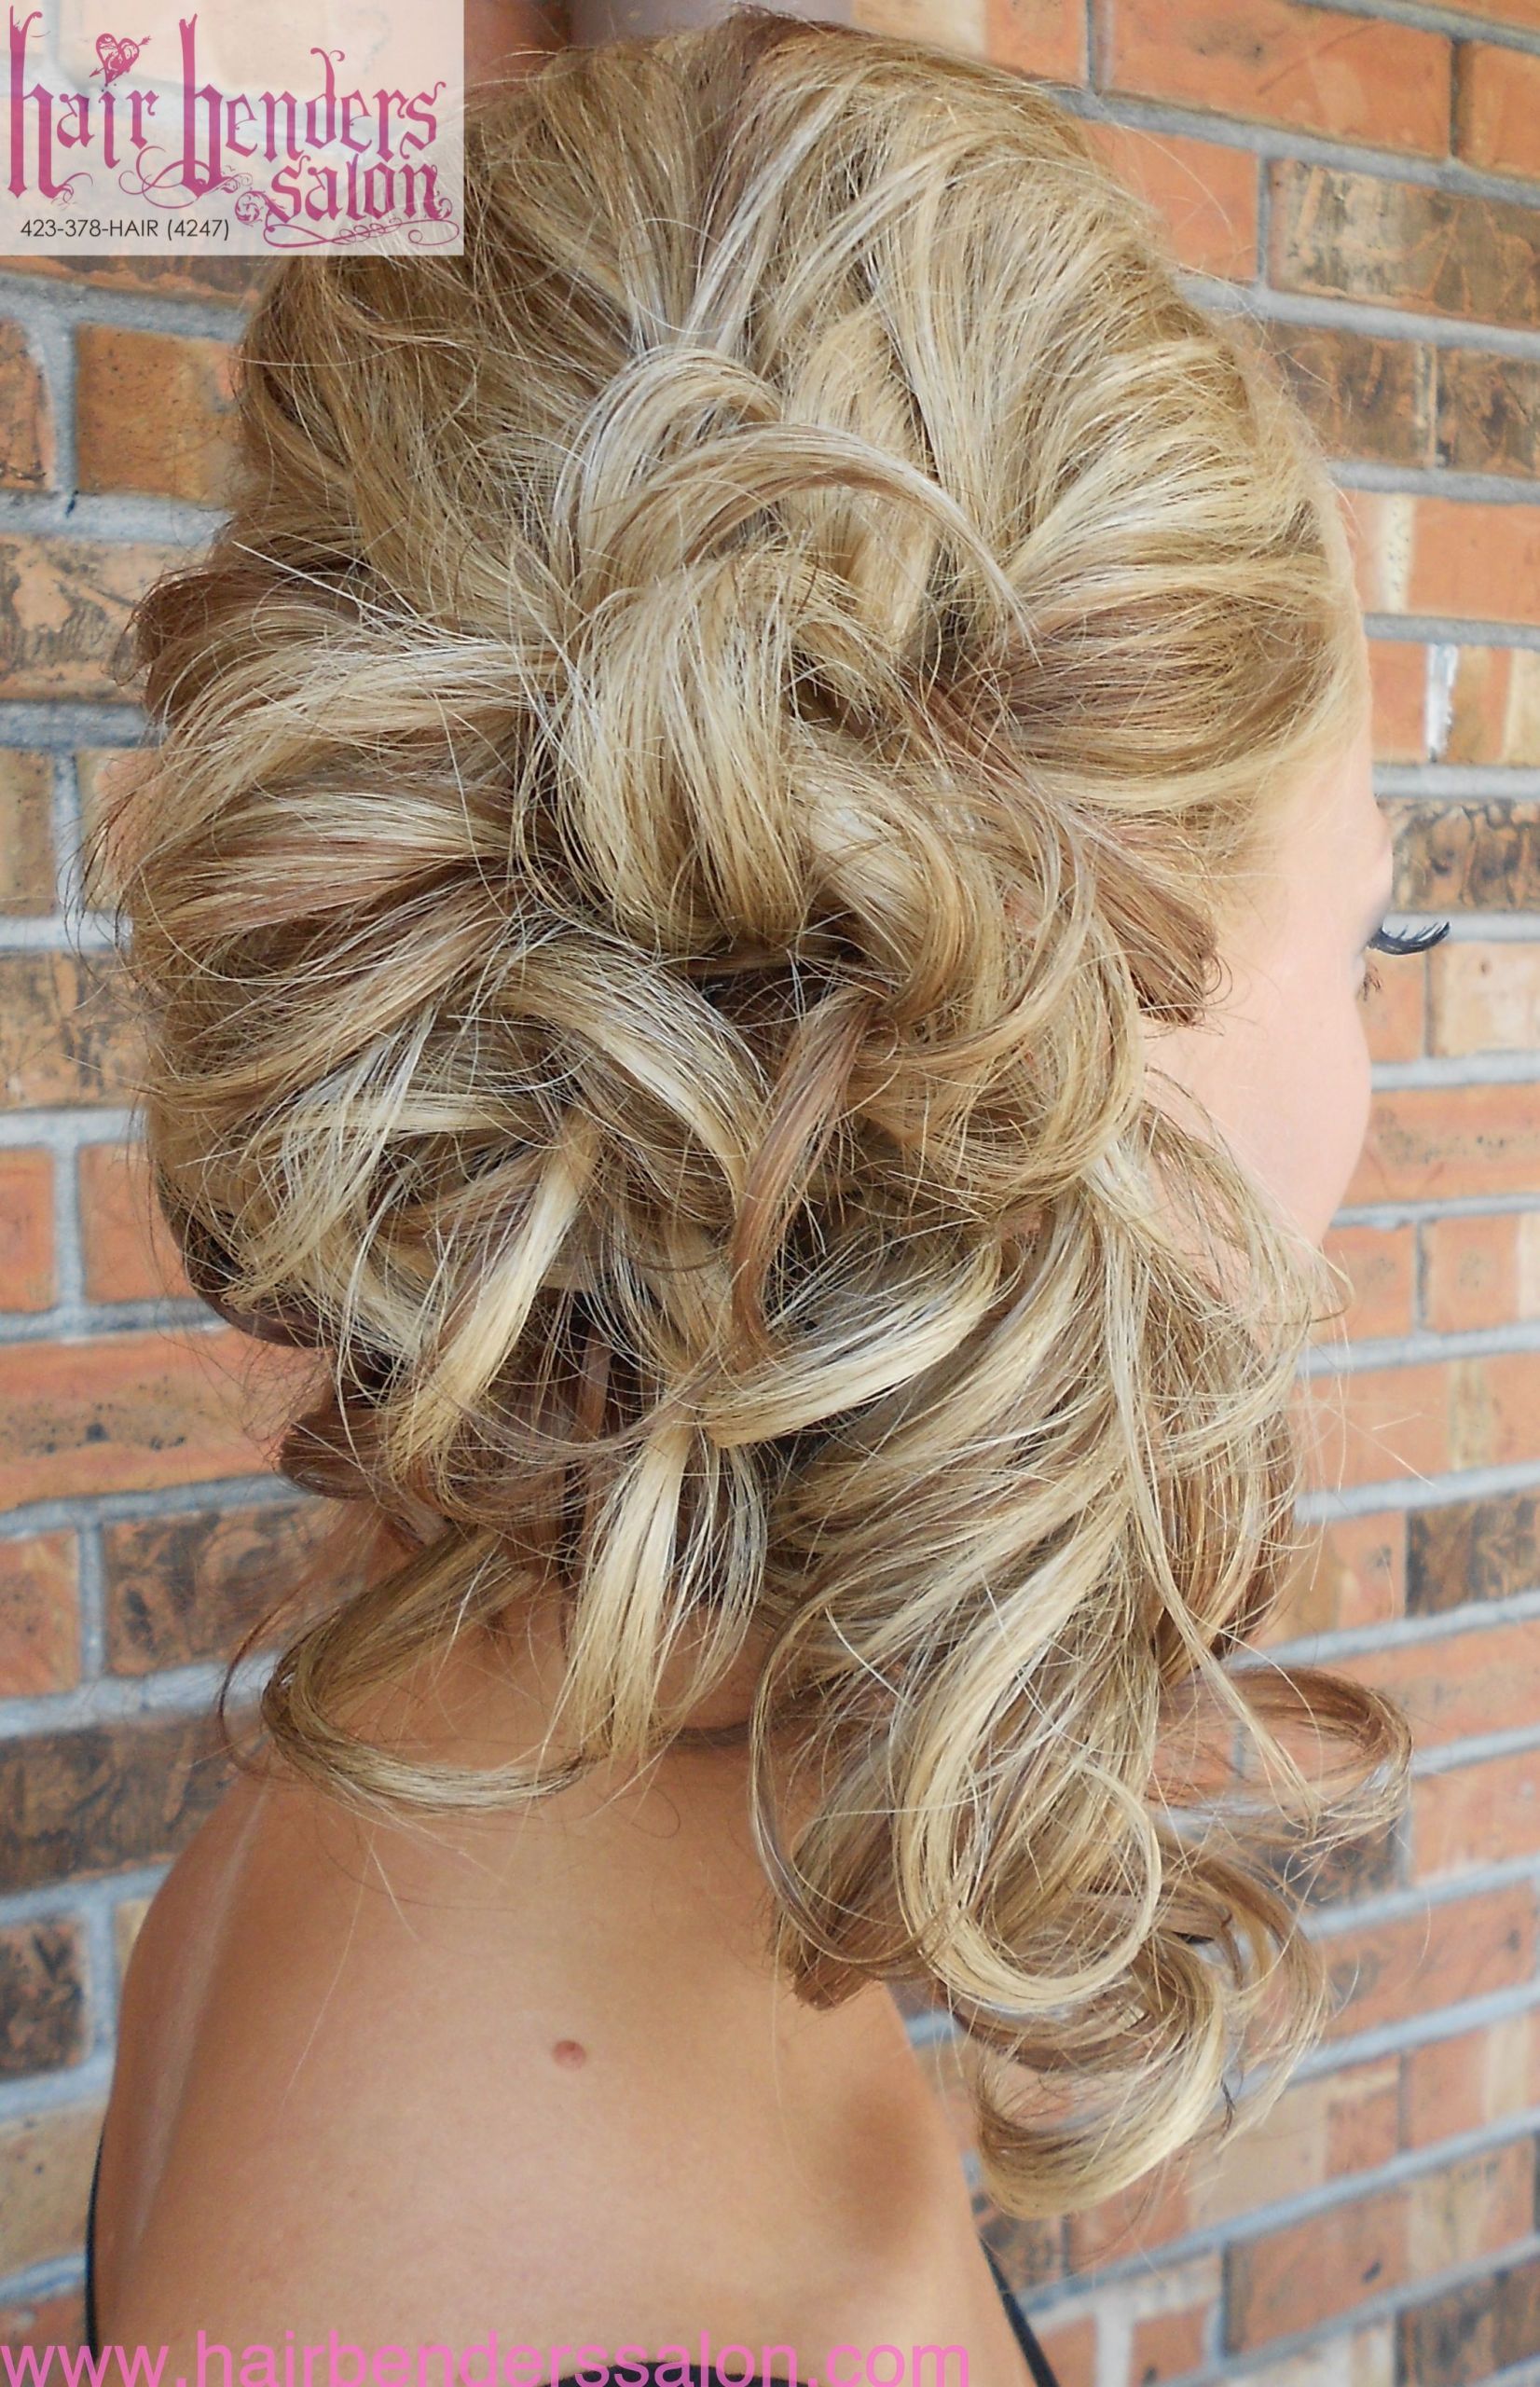 Side Ponytail Wedding Hairstyles
 Curls pinned to side side ponytail